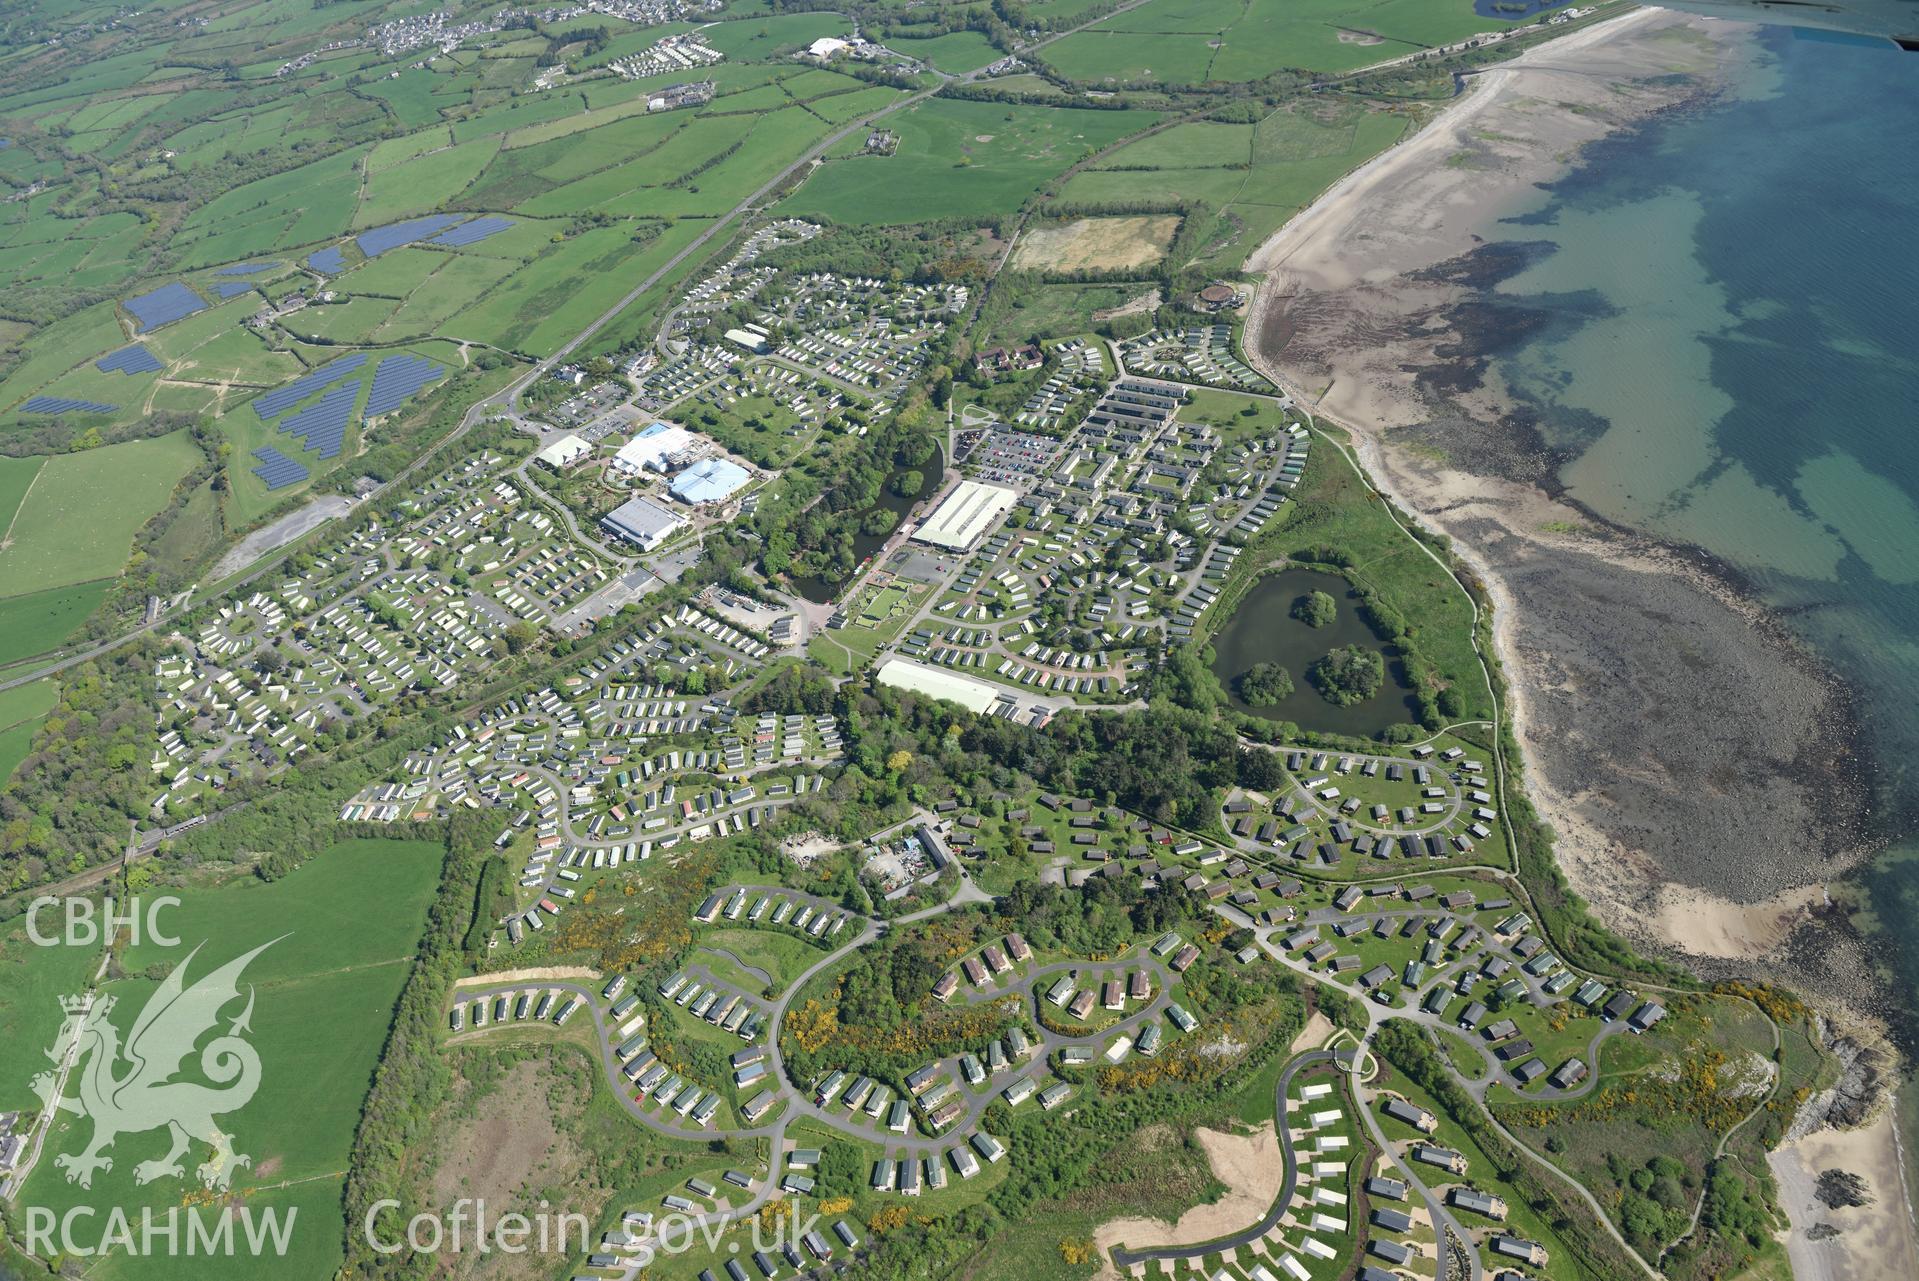 Aerial photography of Hafan y Mor taken on 3rd May 2017.  Baseline aerial reconnaissance survey for the CHERISH Project. ? Crown: CHERISH PROJECT 2017. Produced with EU funds through the Ireland Wales Co-operation Programme 2014-2020. All material made freely available through the Open Government Licence.